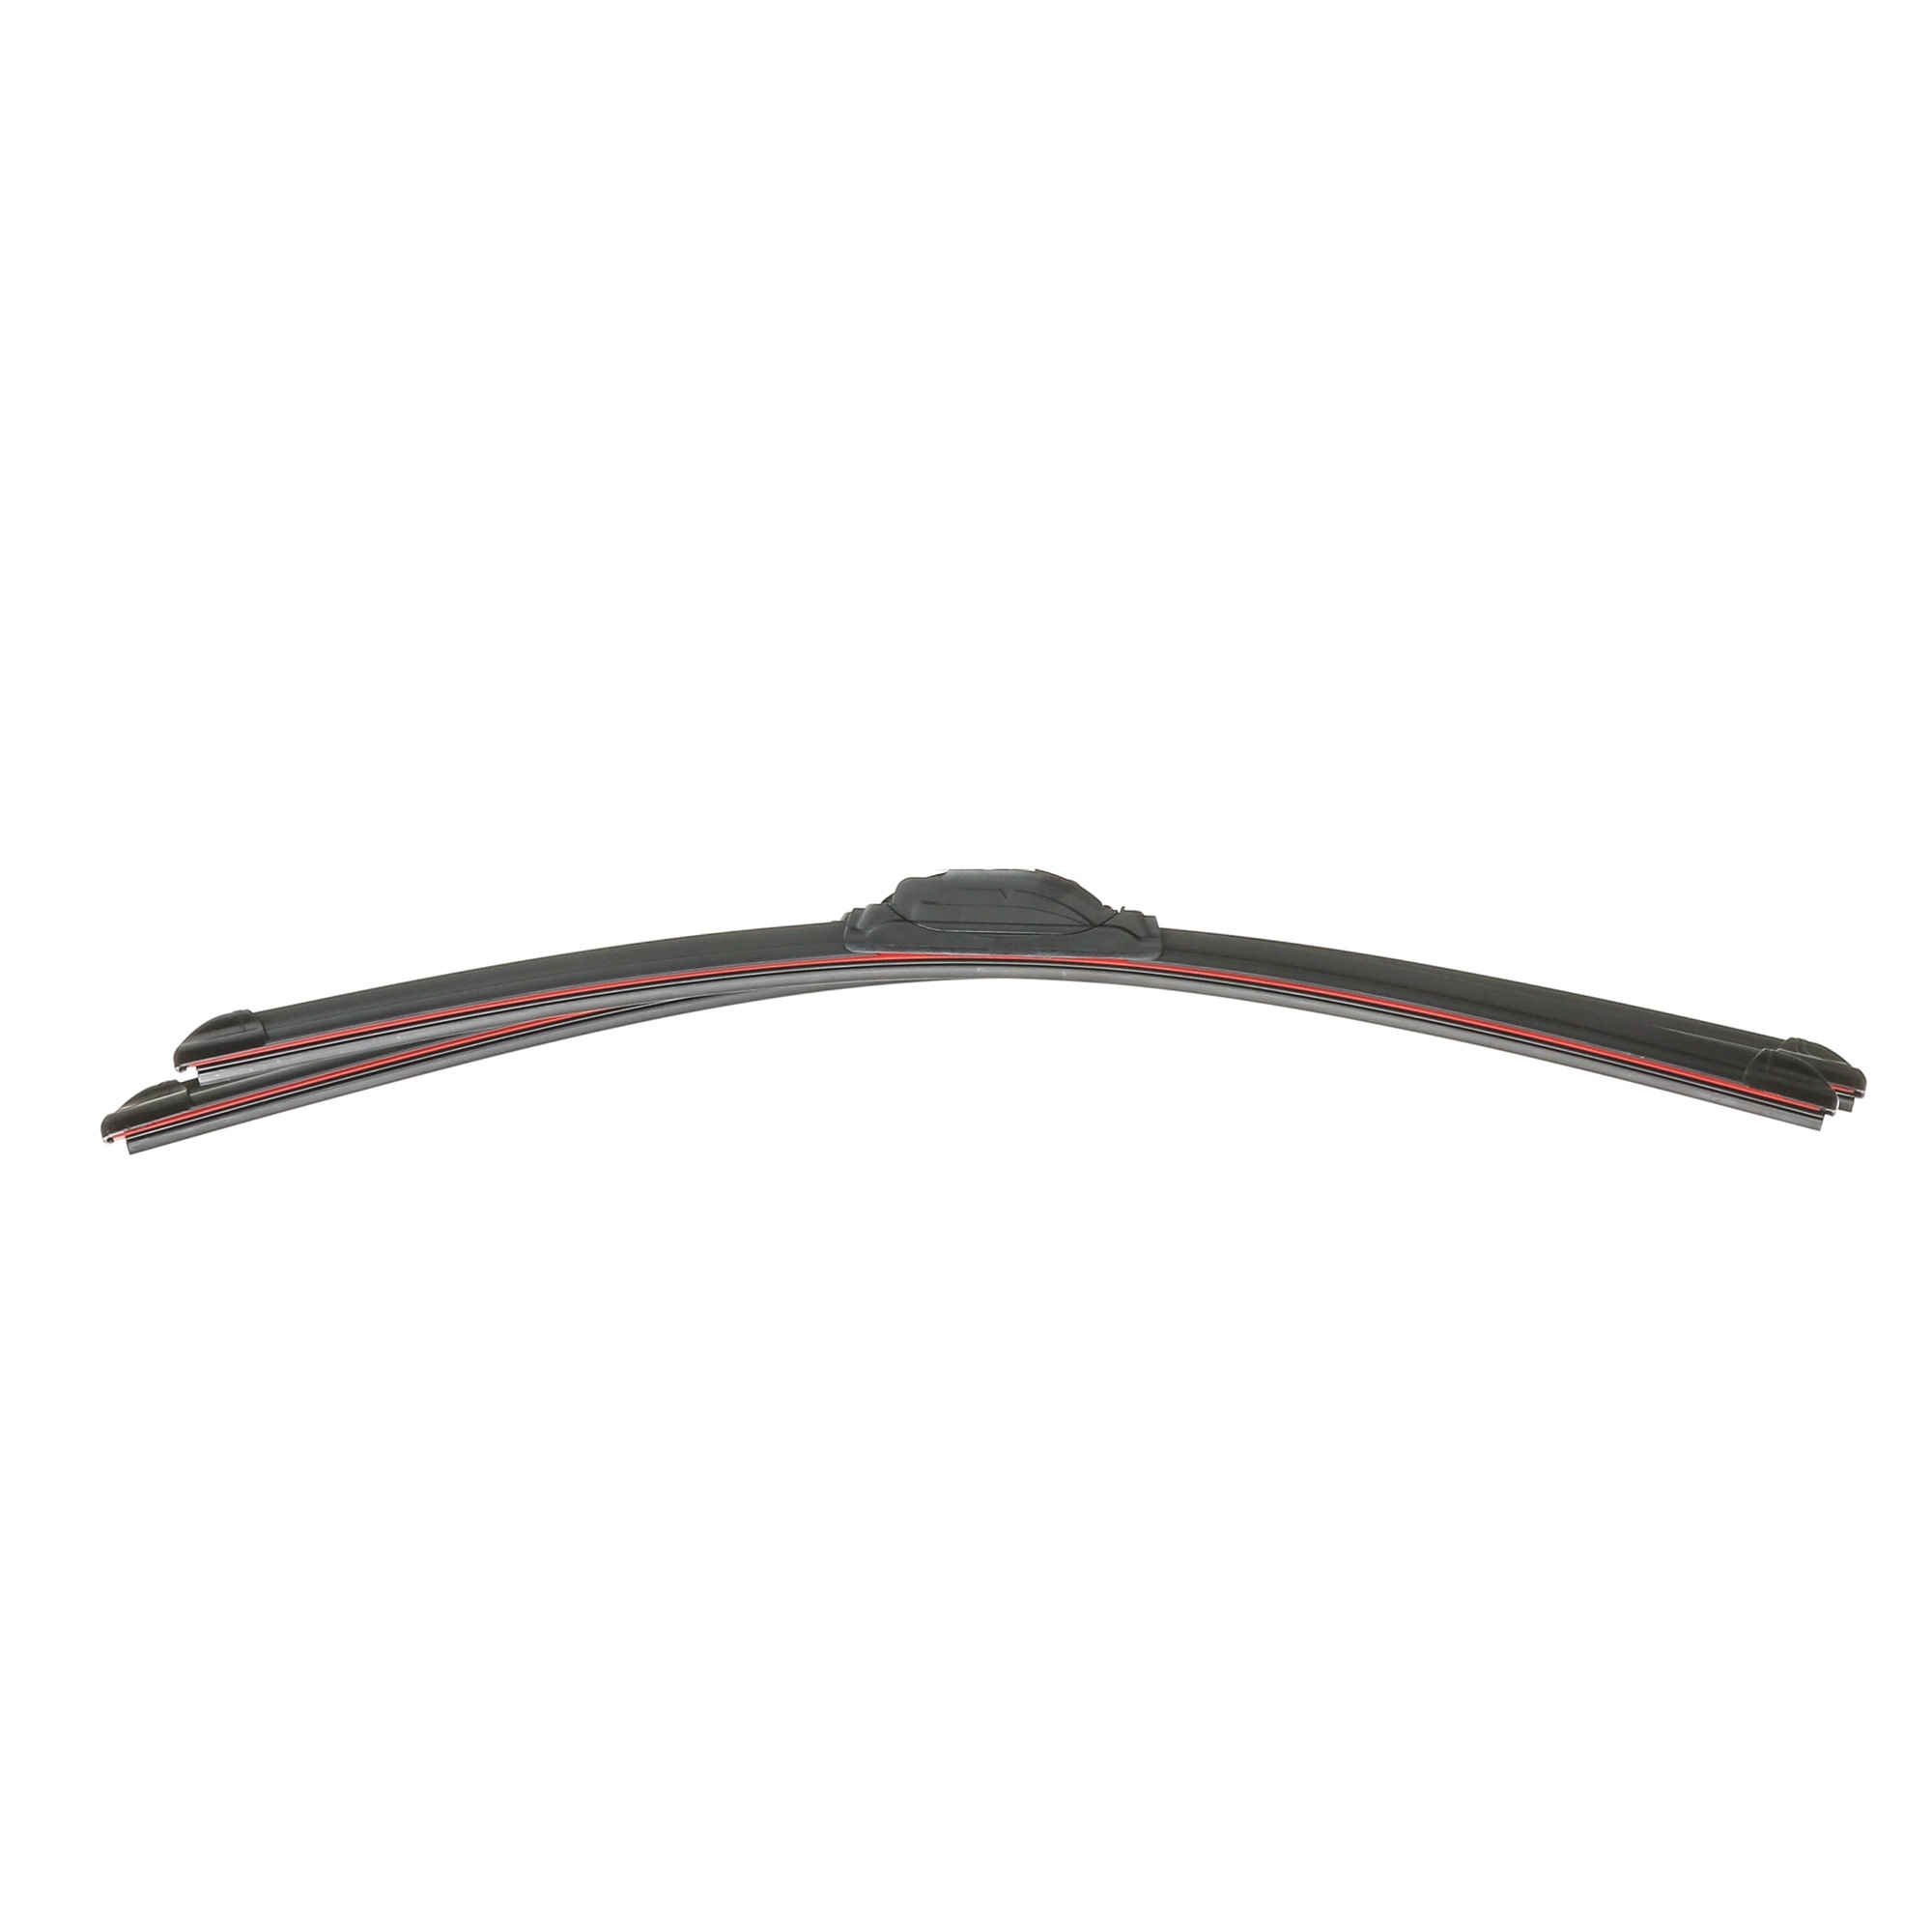 RIDEX 298W0500 Wiper blade 600, 550 mm Front, Beam, with spoiler, for left-hand drive vehicles, 24/22 Inch